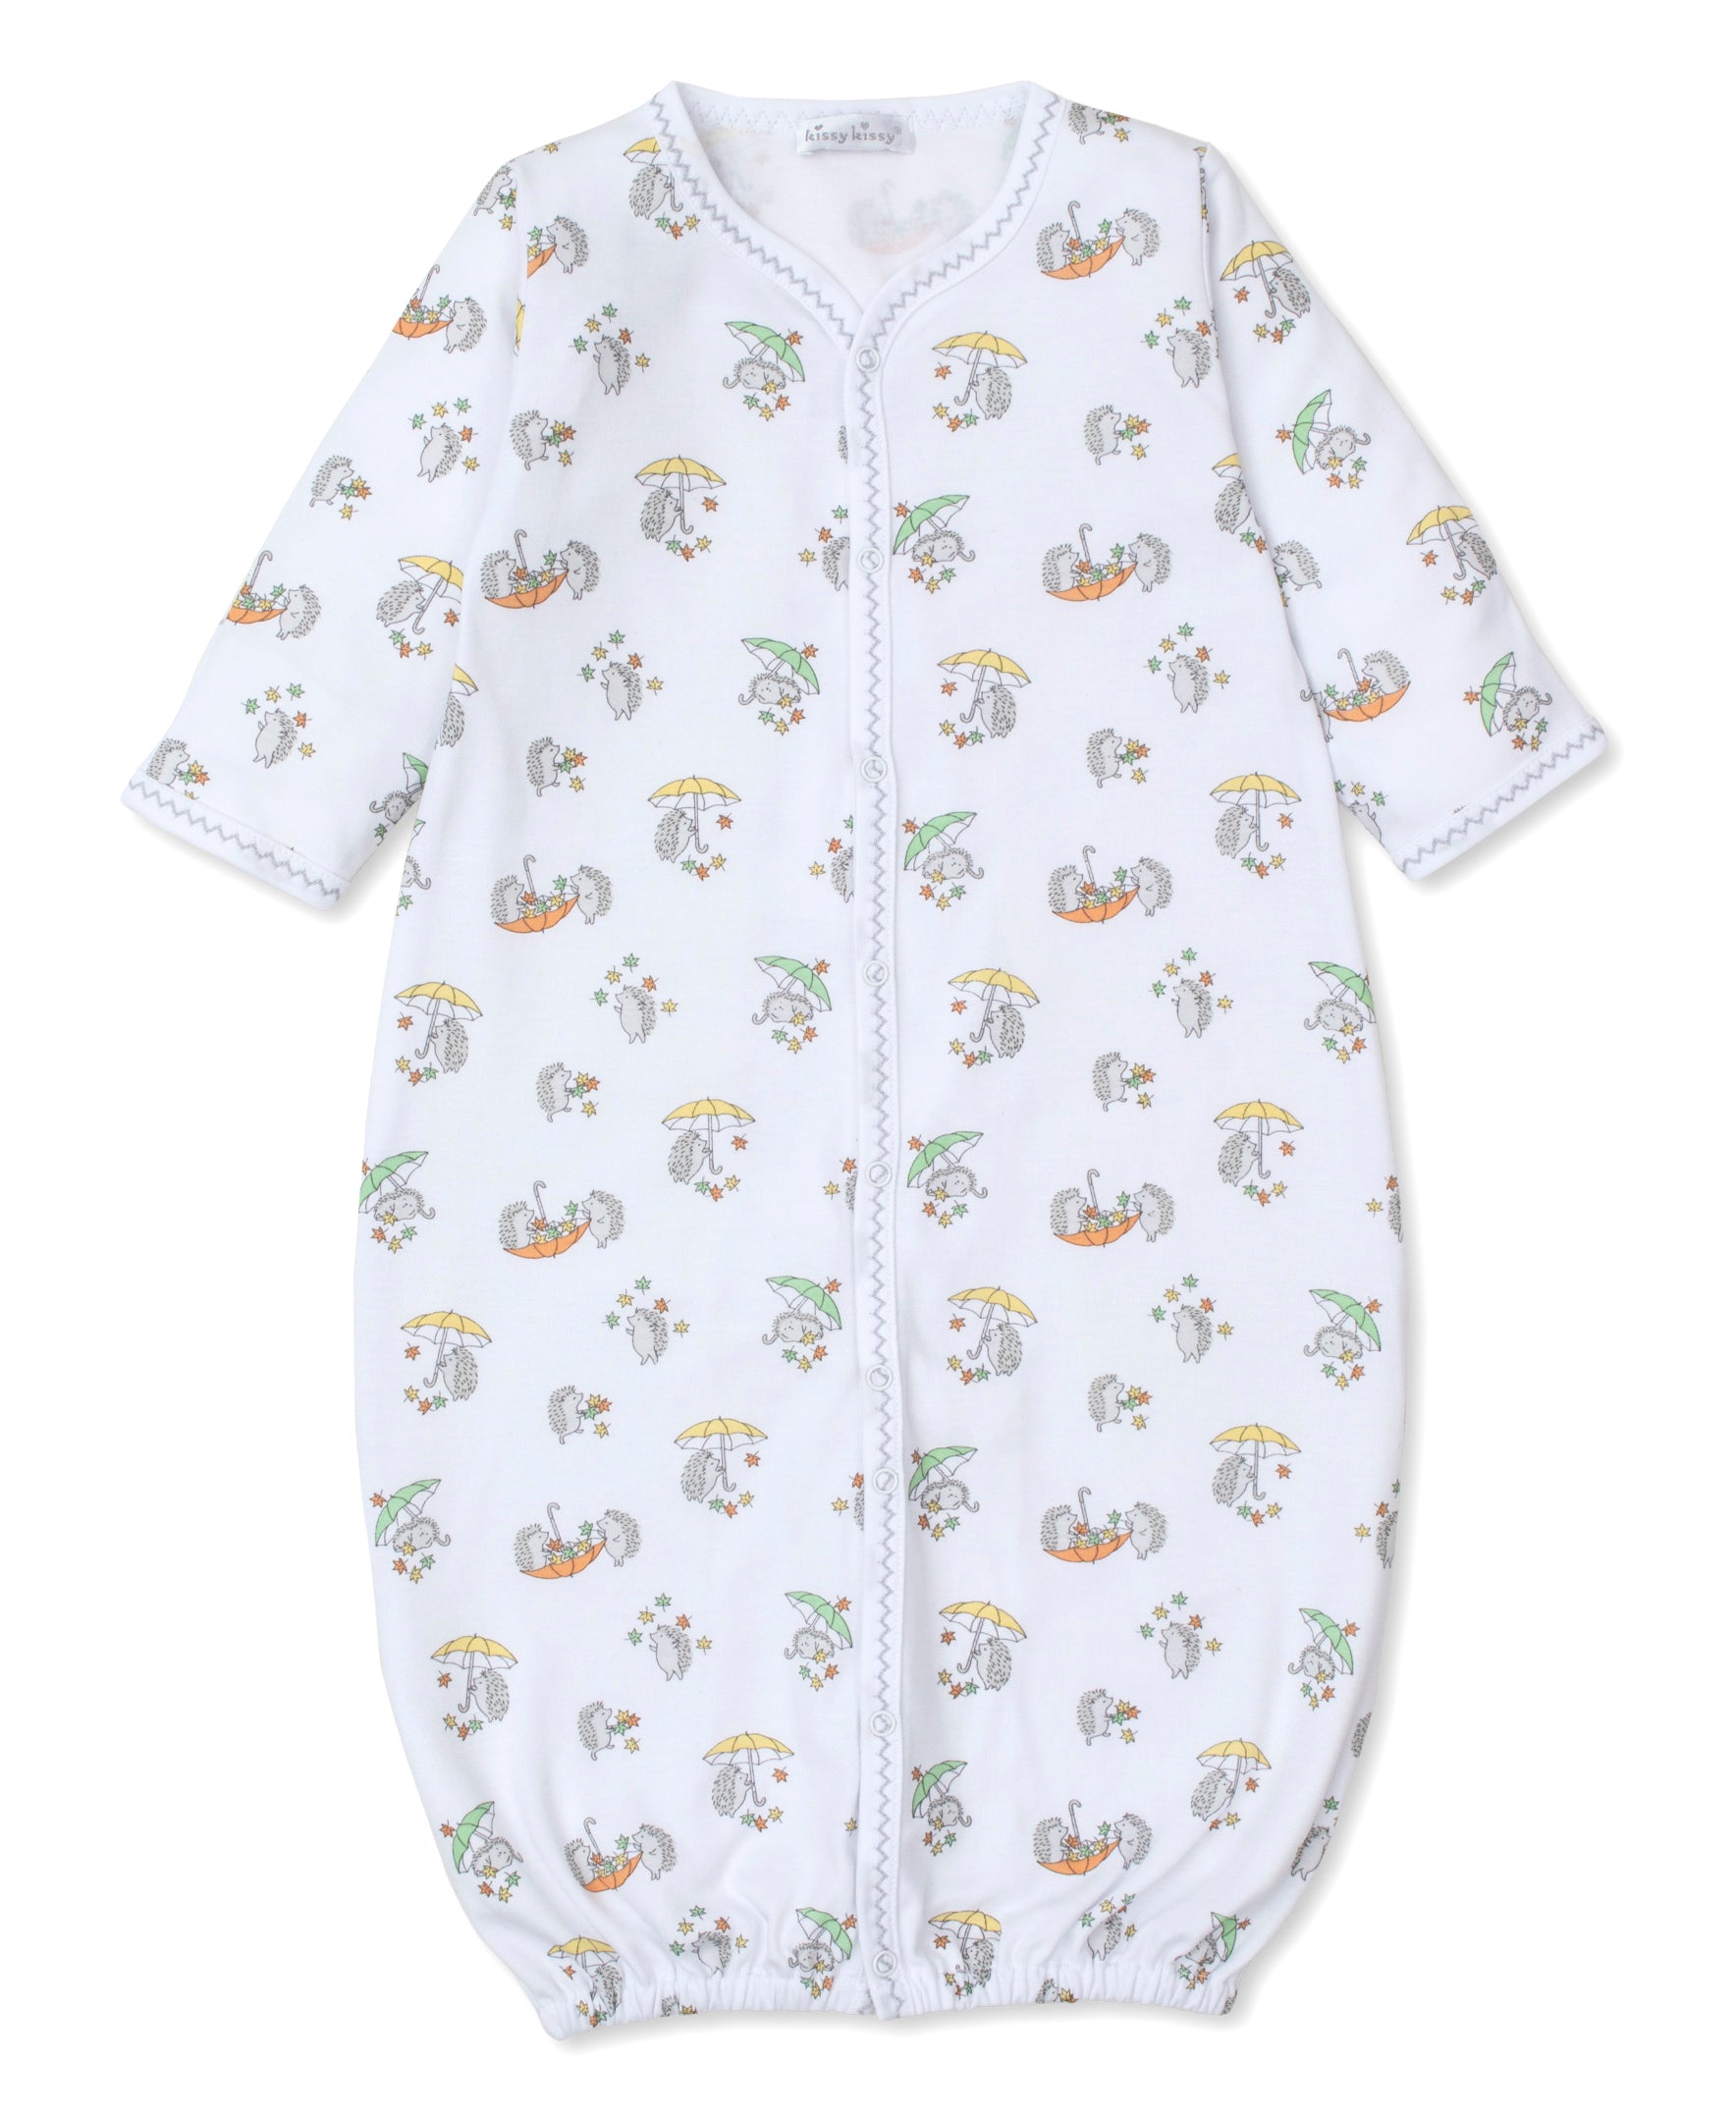 Hedgehogs Fall Showers Convertible Gown - Kissy Kissy